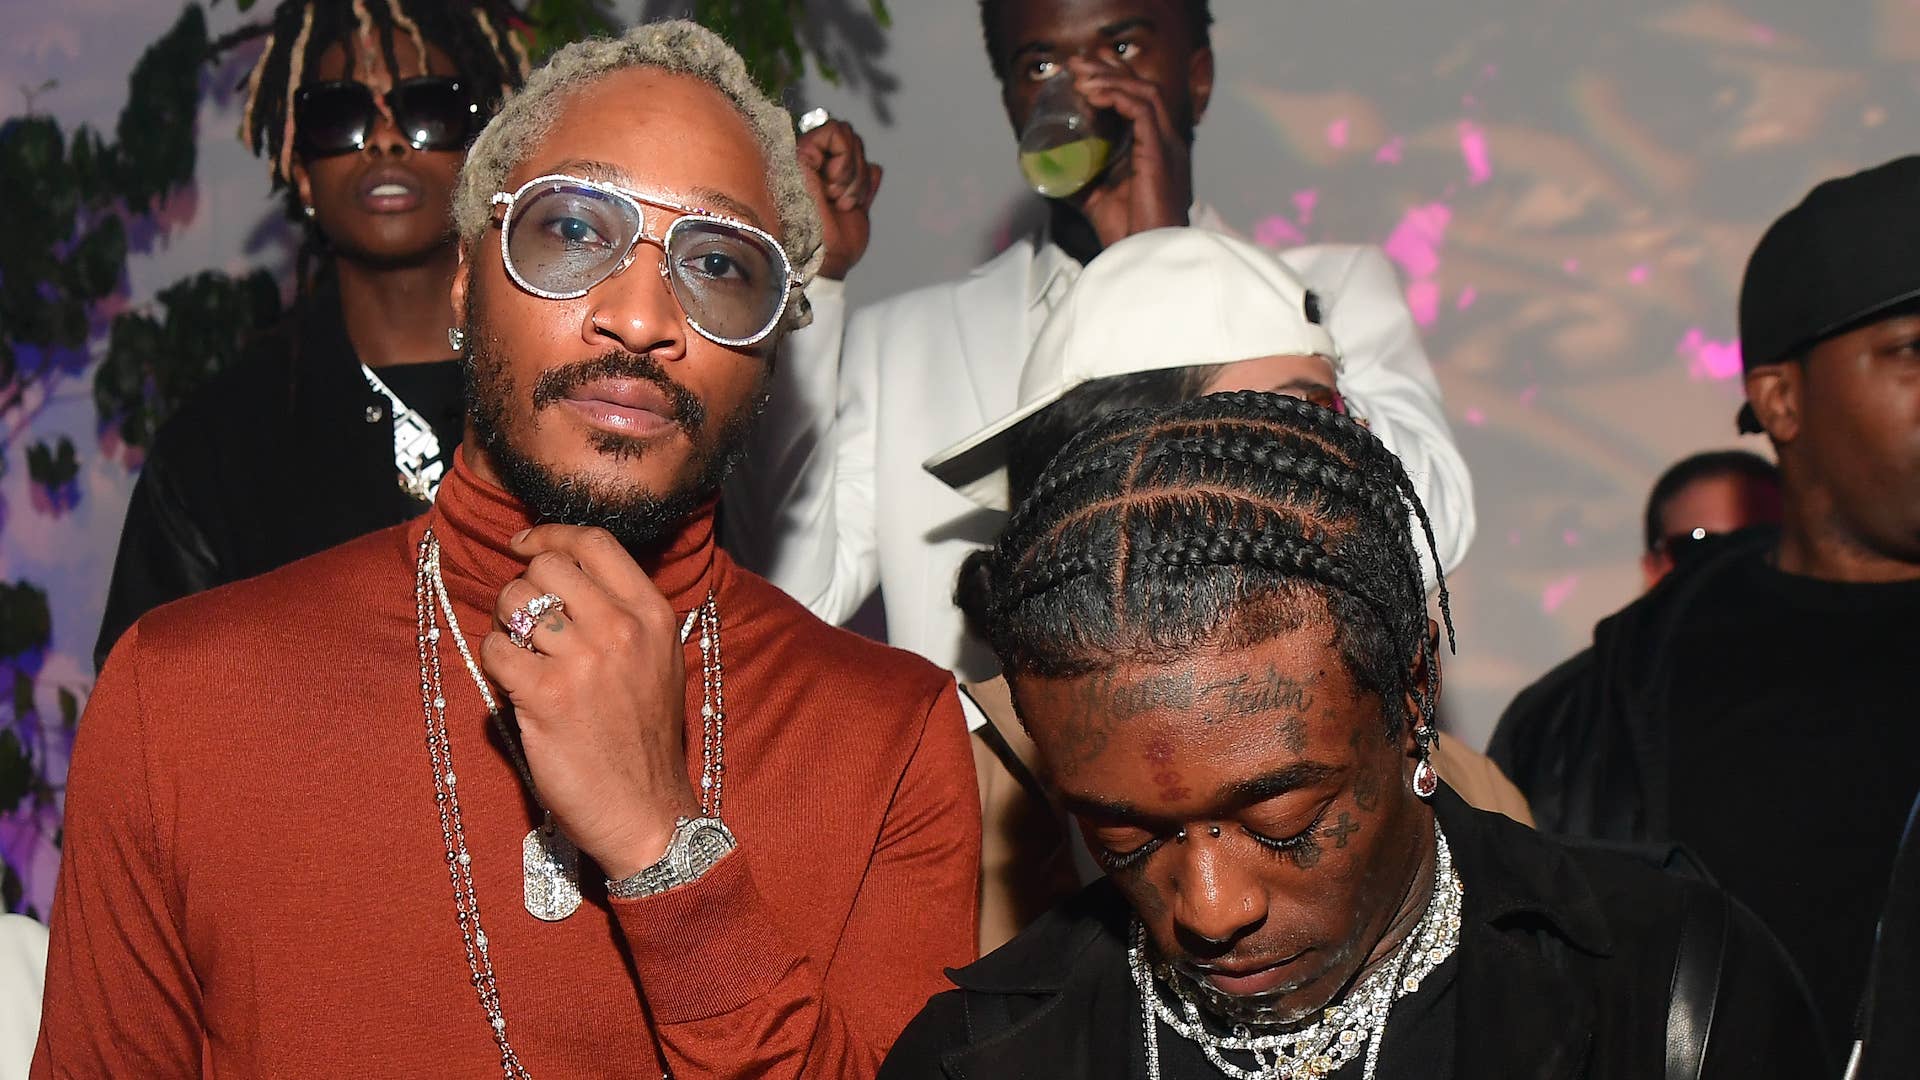 Future and Lil Uzi Vert attend Forever or Never Birthday Celebration